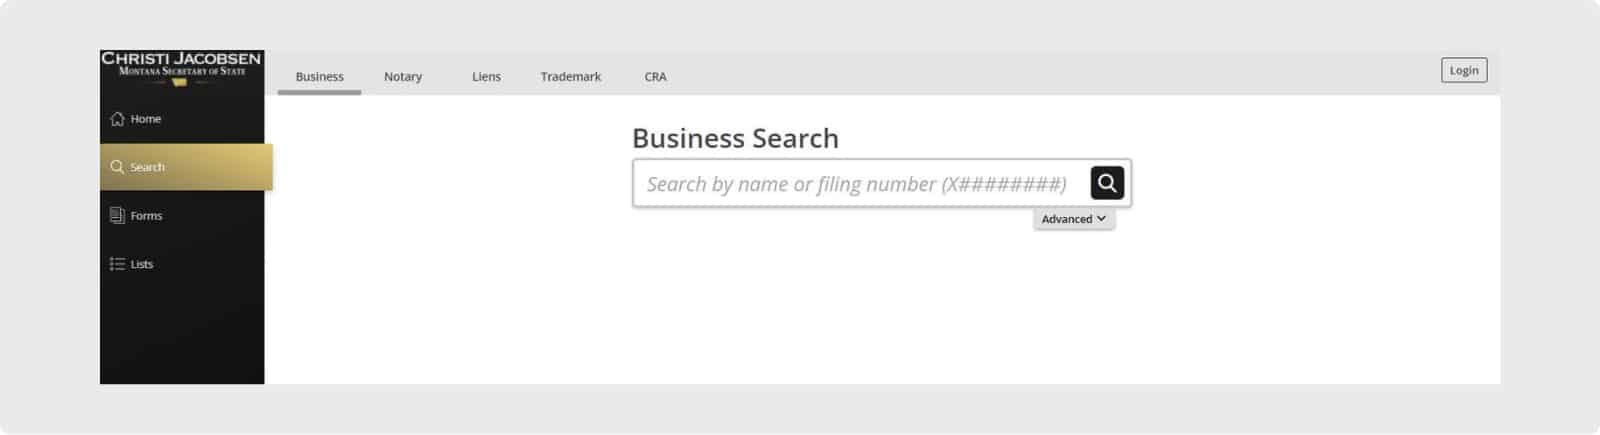 Montana Secretary of State Business Name Search Form